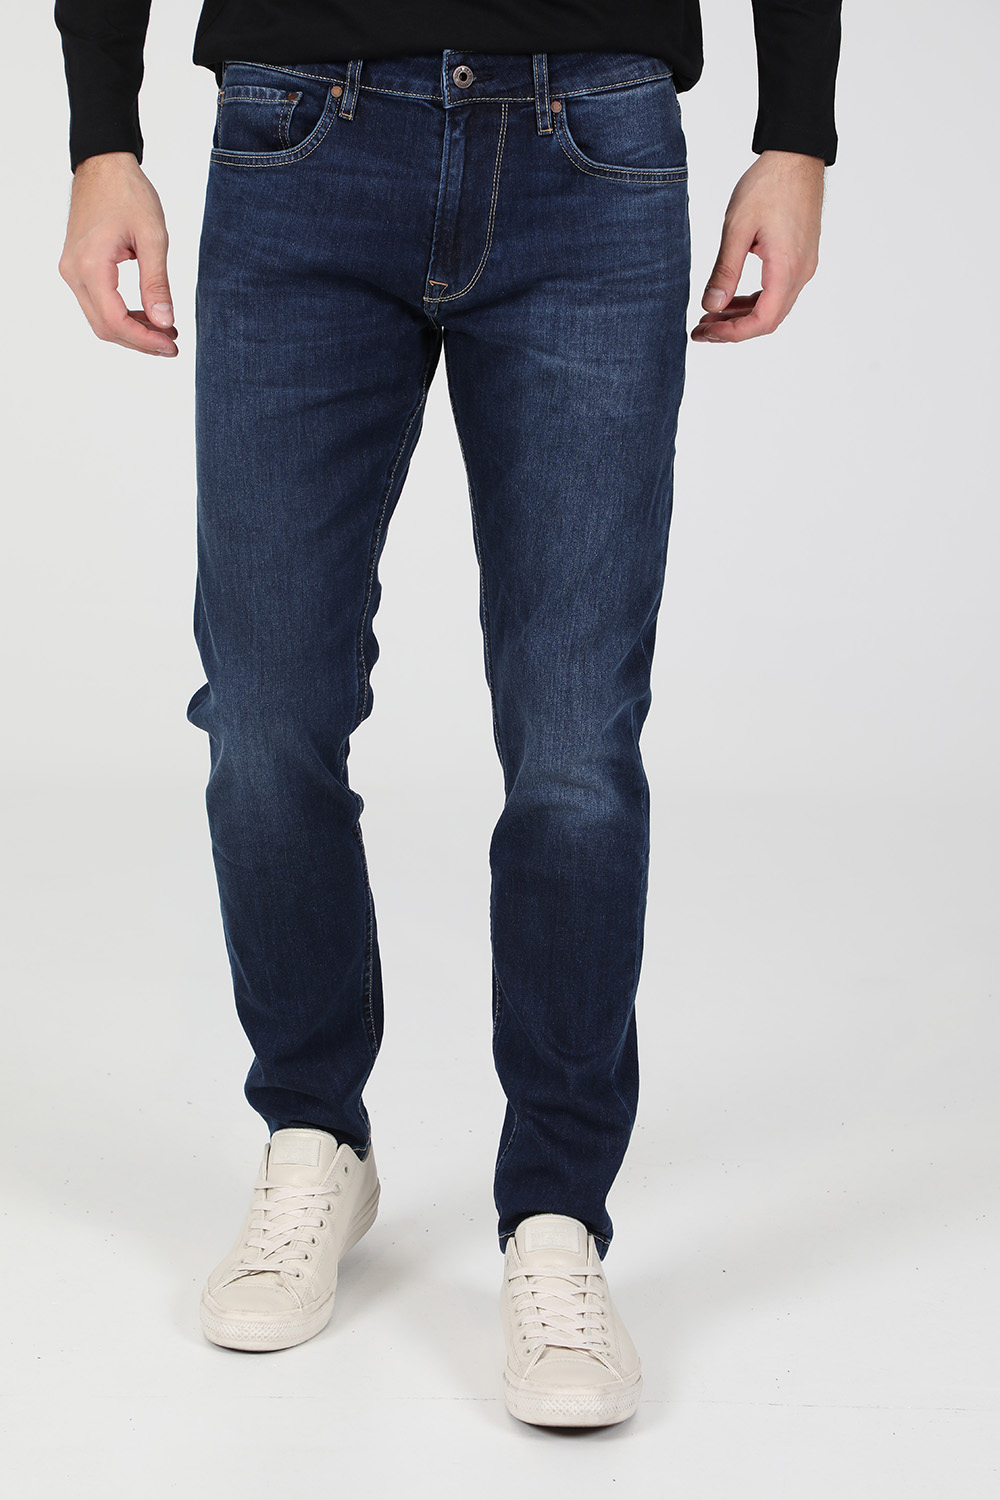 PEPE JEANS – Ανδρικό jean παντελόνι PEPE JEANS STANLEY μπλε 1822917.0-0015